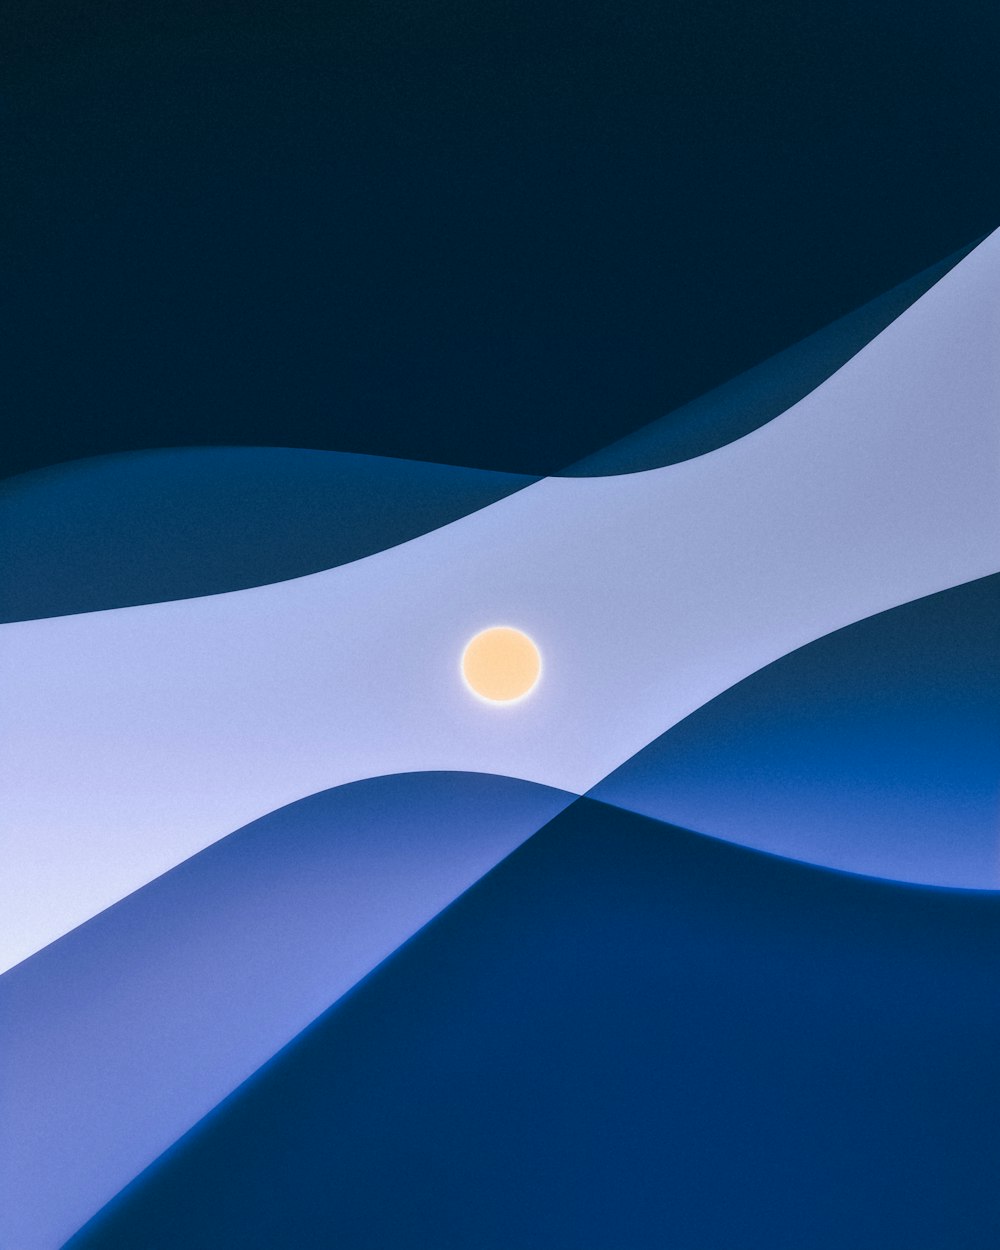 a blue and white abstract background with a sun in the middle